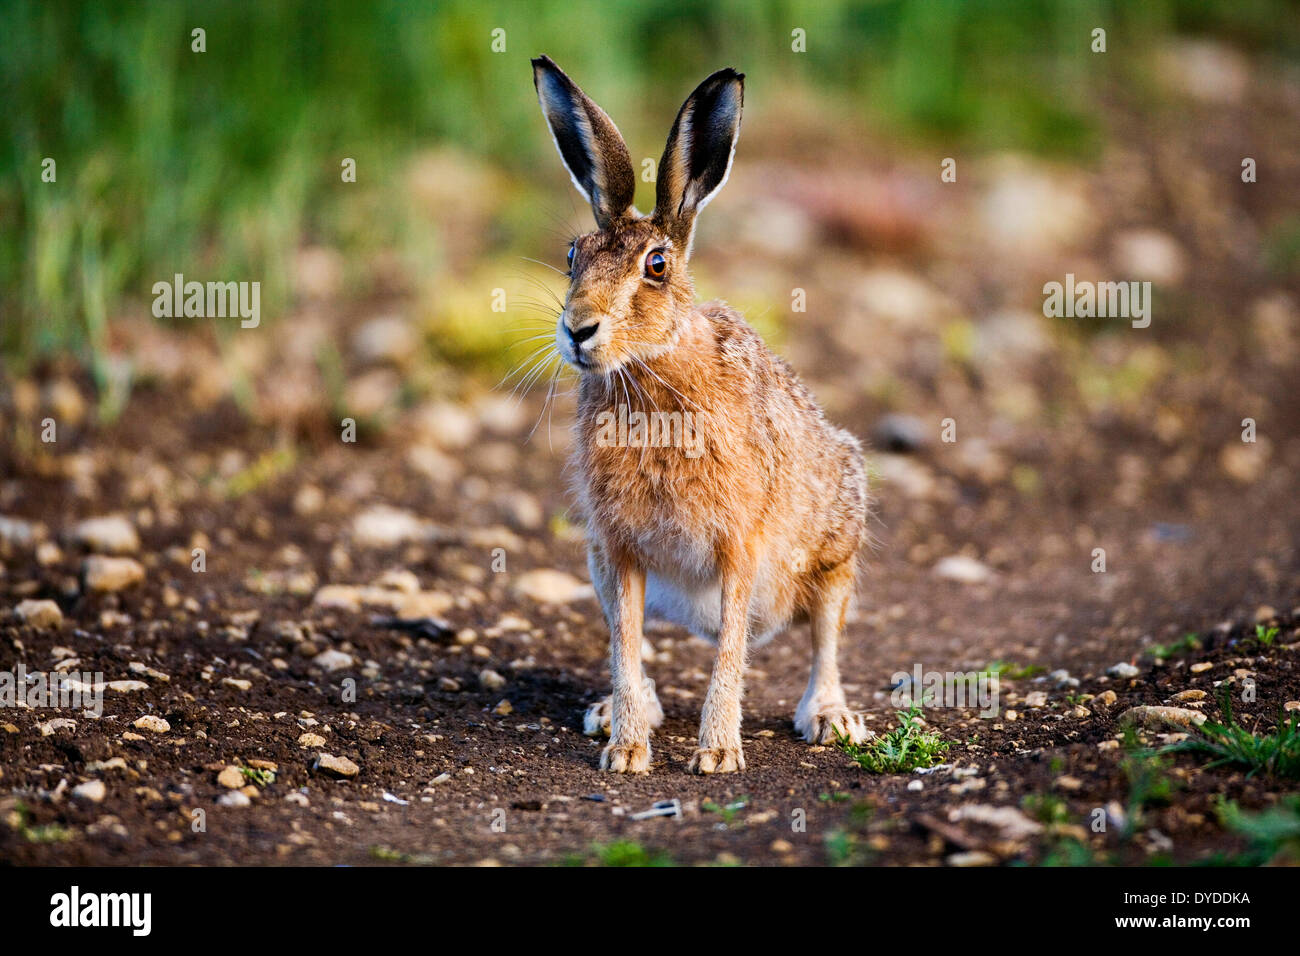 A Brown Hare in a field. Stock Photo